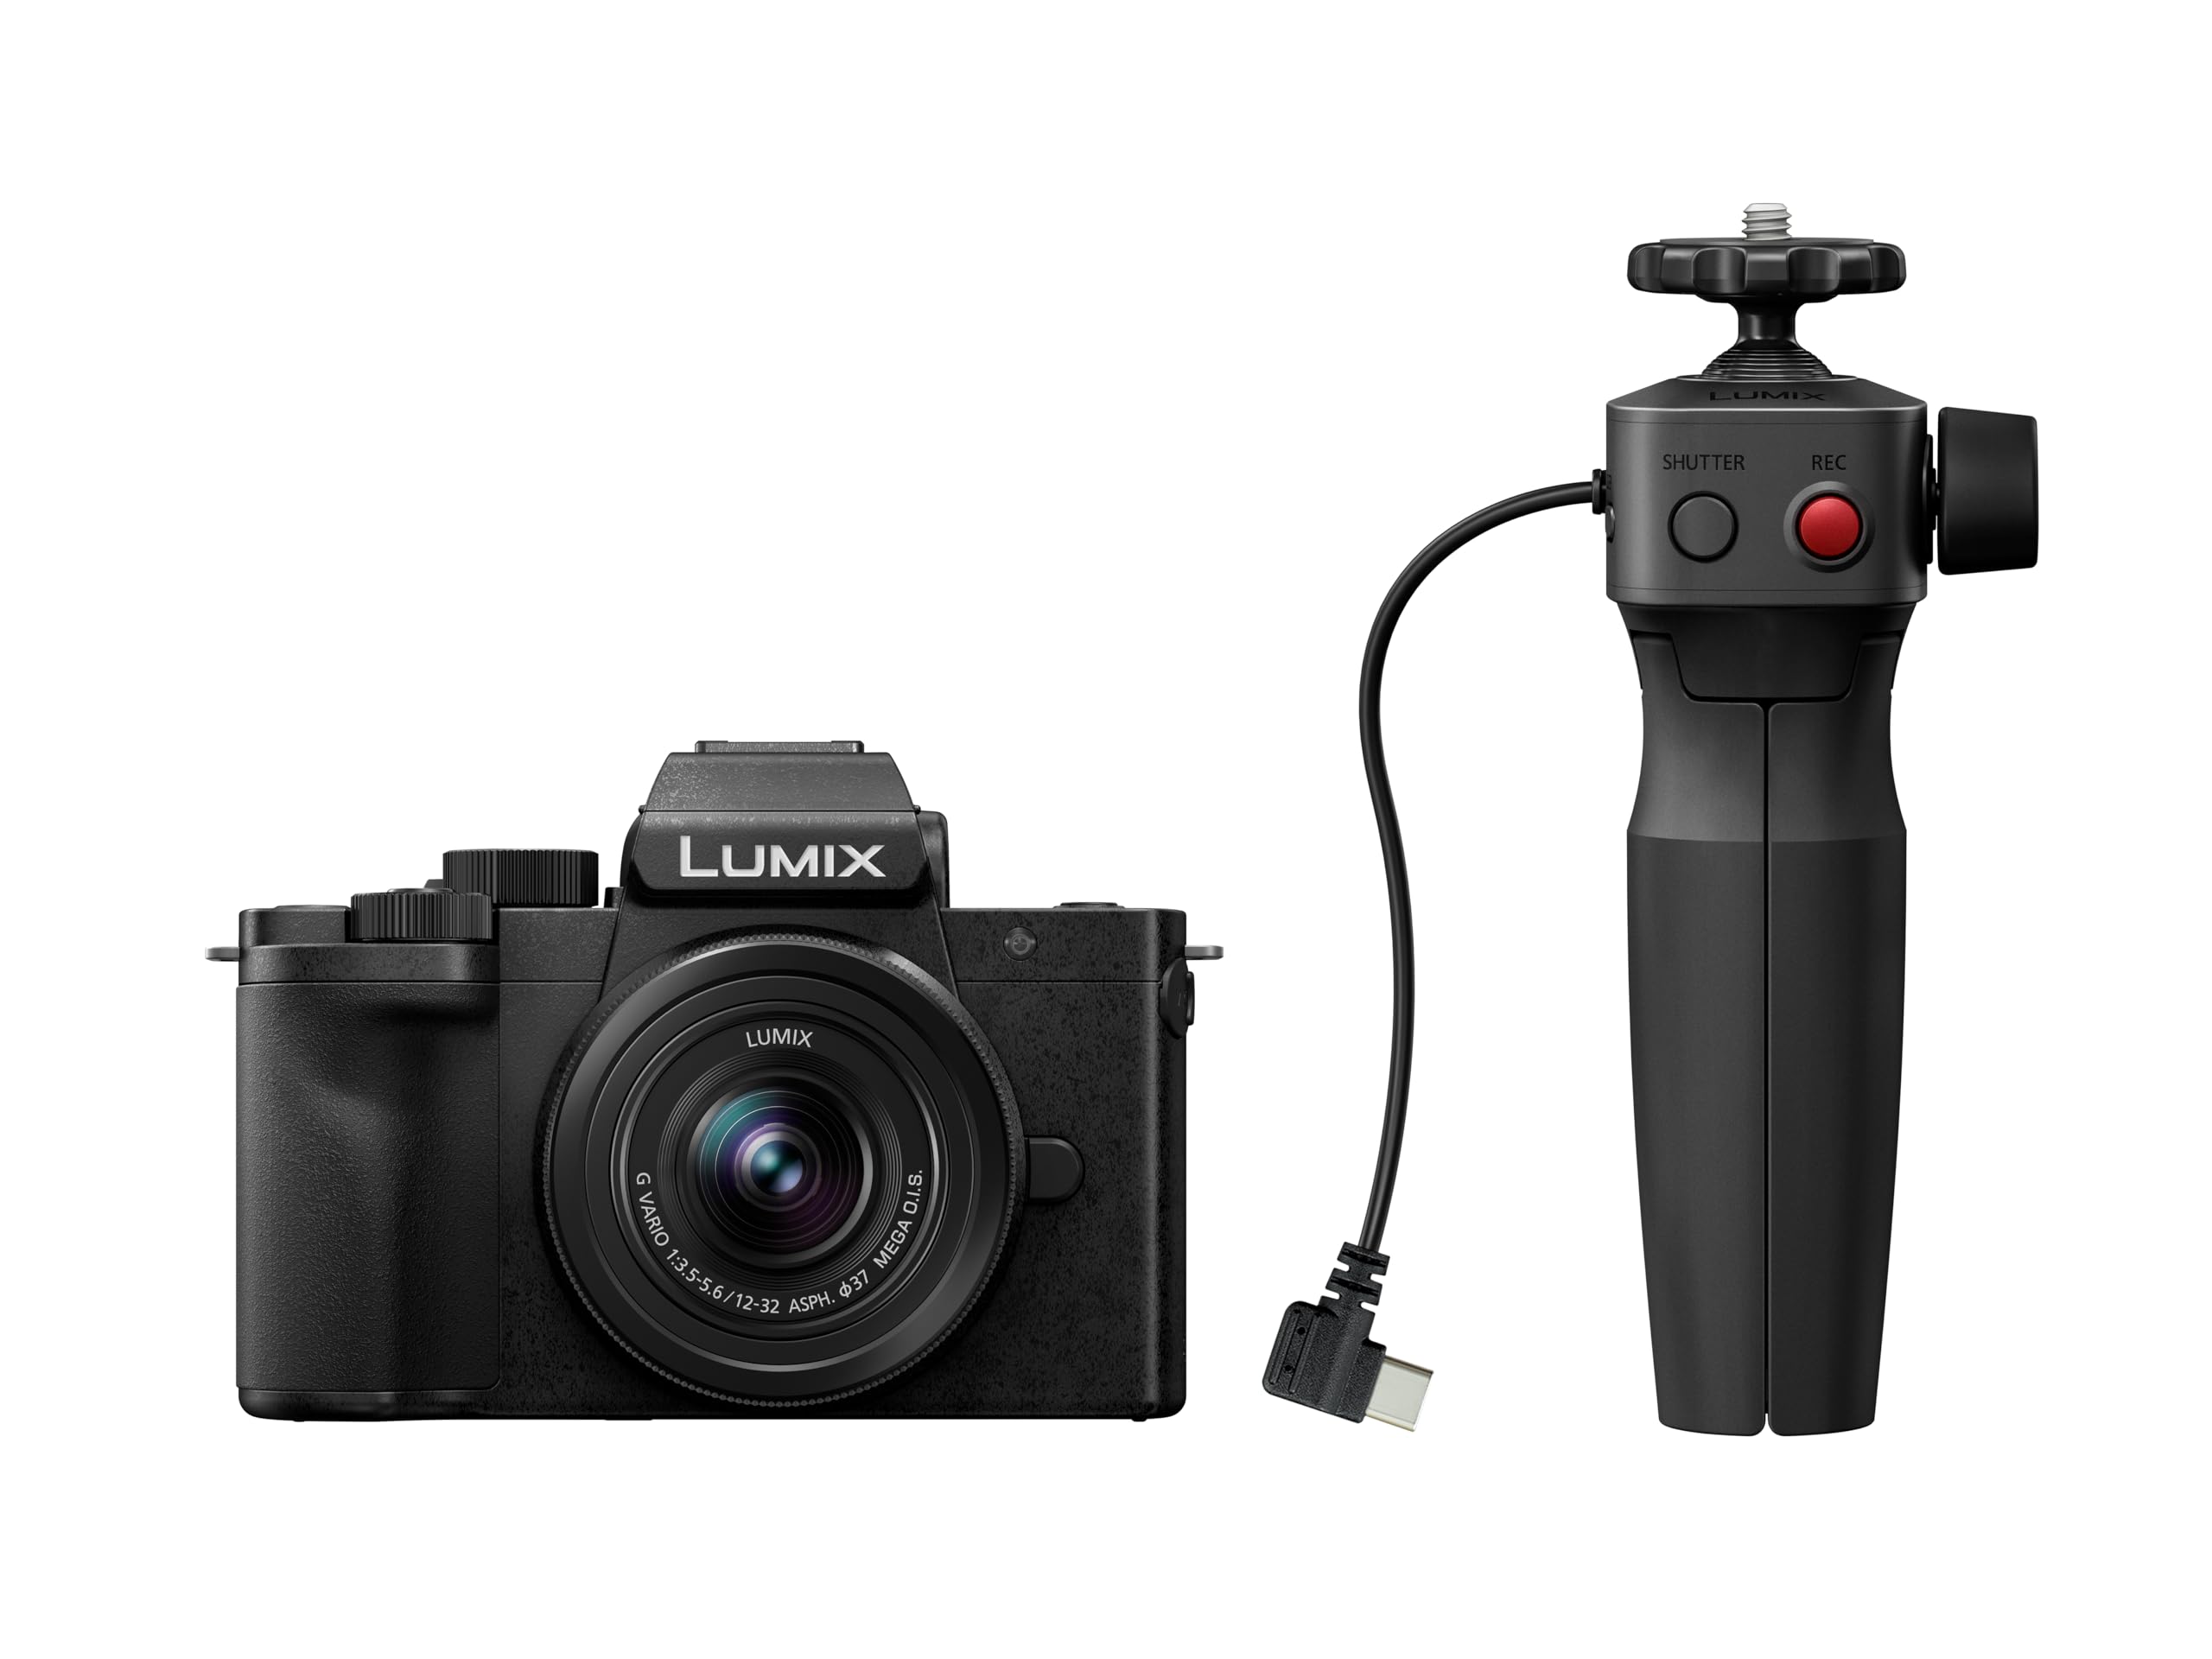 Panasonic LUMIX G100 4k Mirrorless Camera, Lightweight Camera for Photo and Video, Built-in Microphone, Micro Four Thirds with 12-32mm Lens, 5-Axis Hybrid I.S., 4K 24p 30p Video, DC-G100DVK (Black)